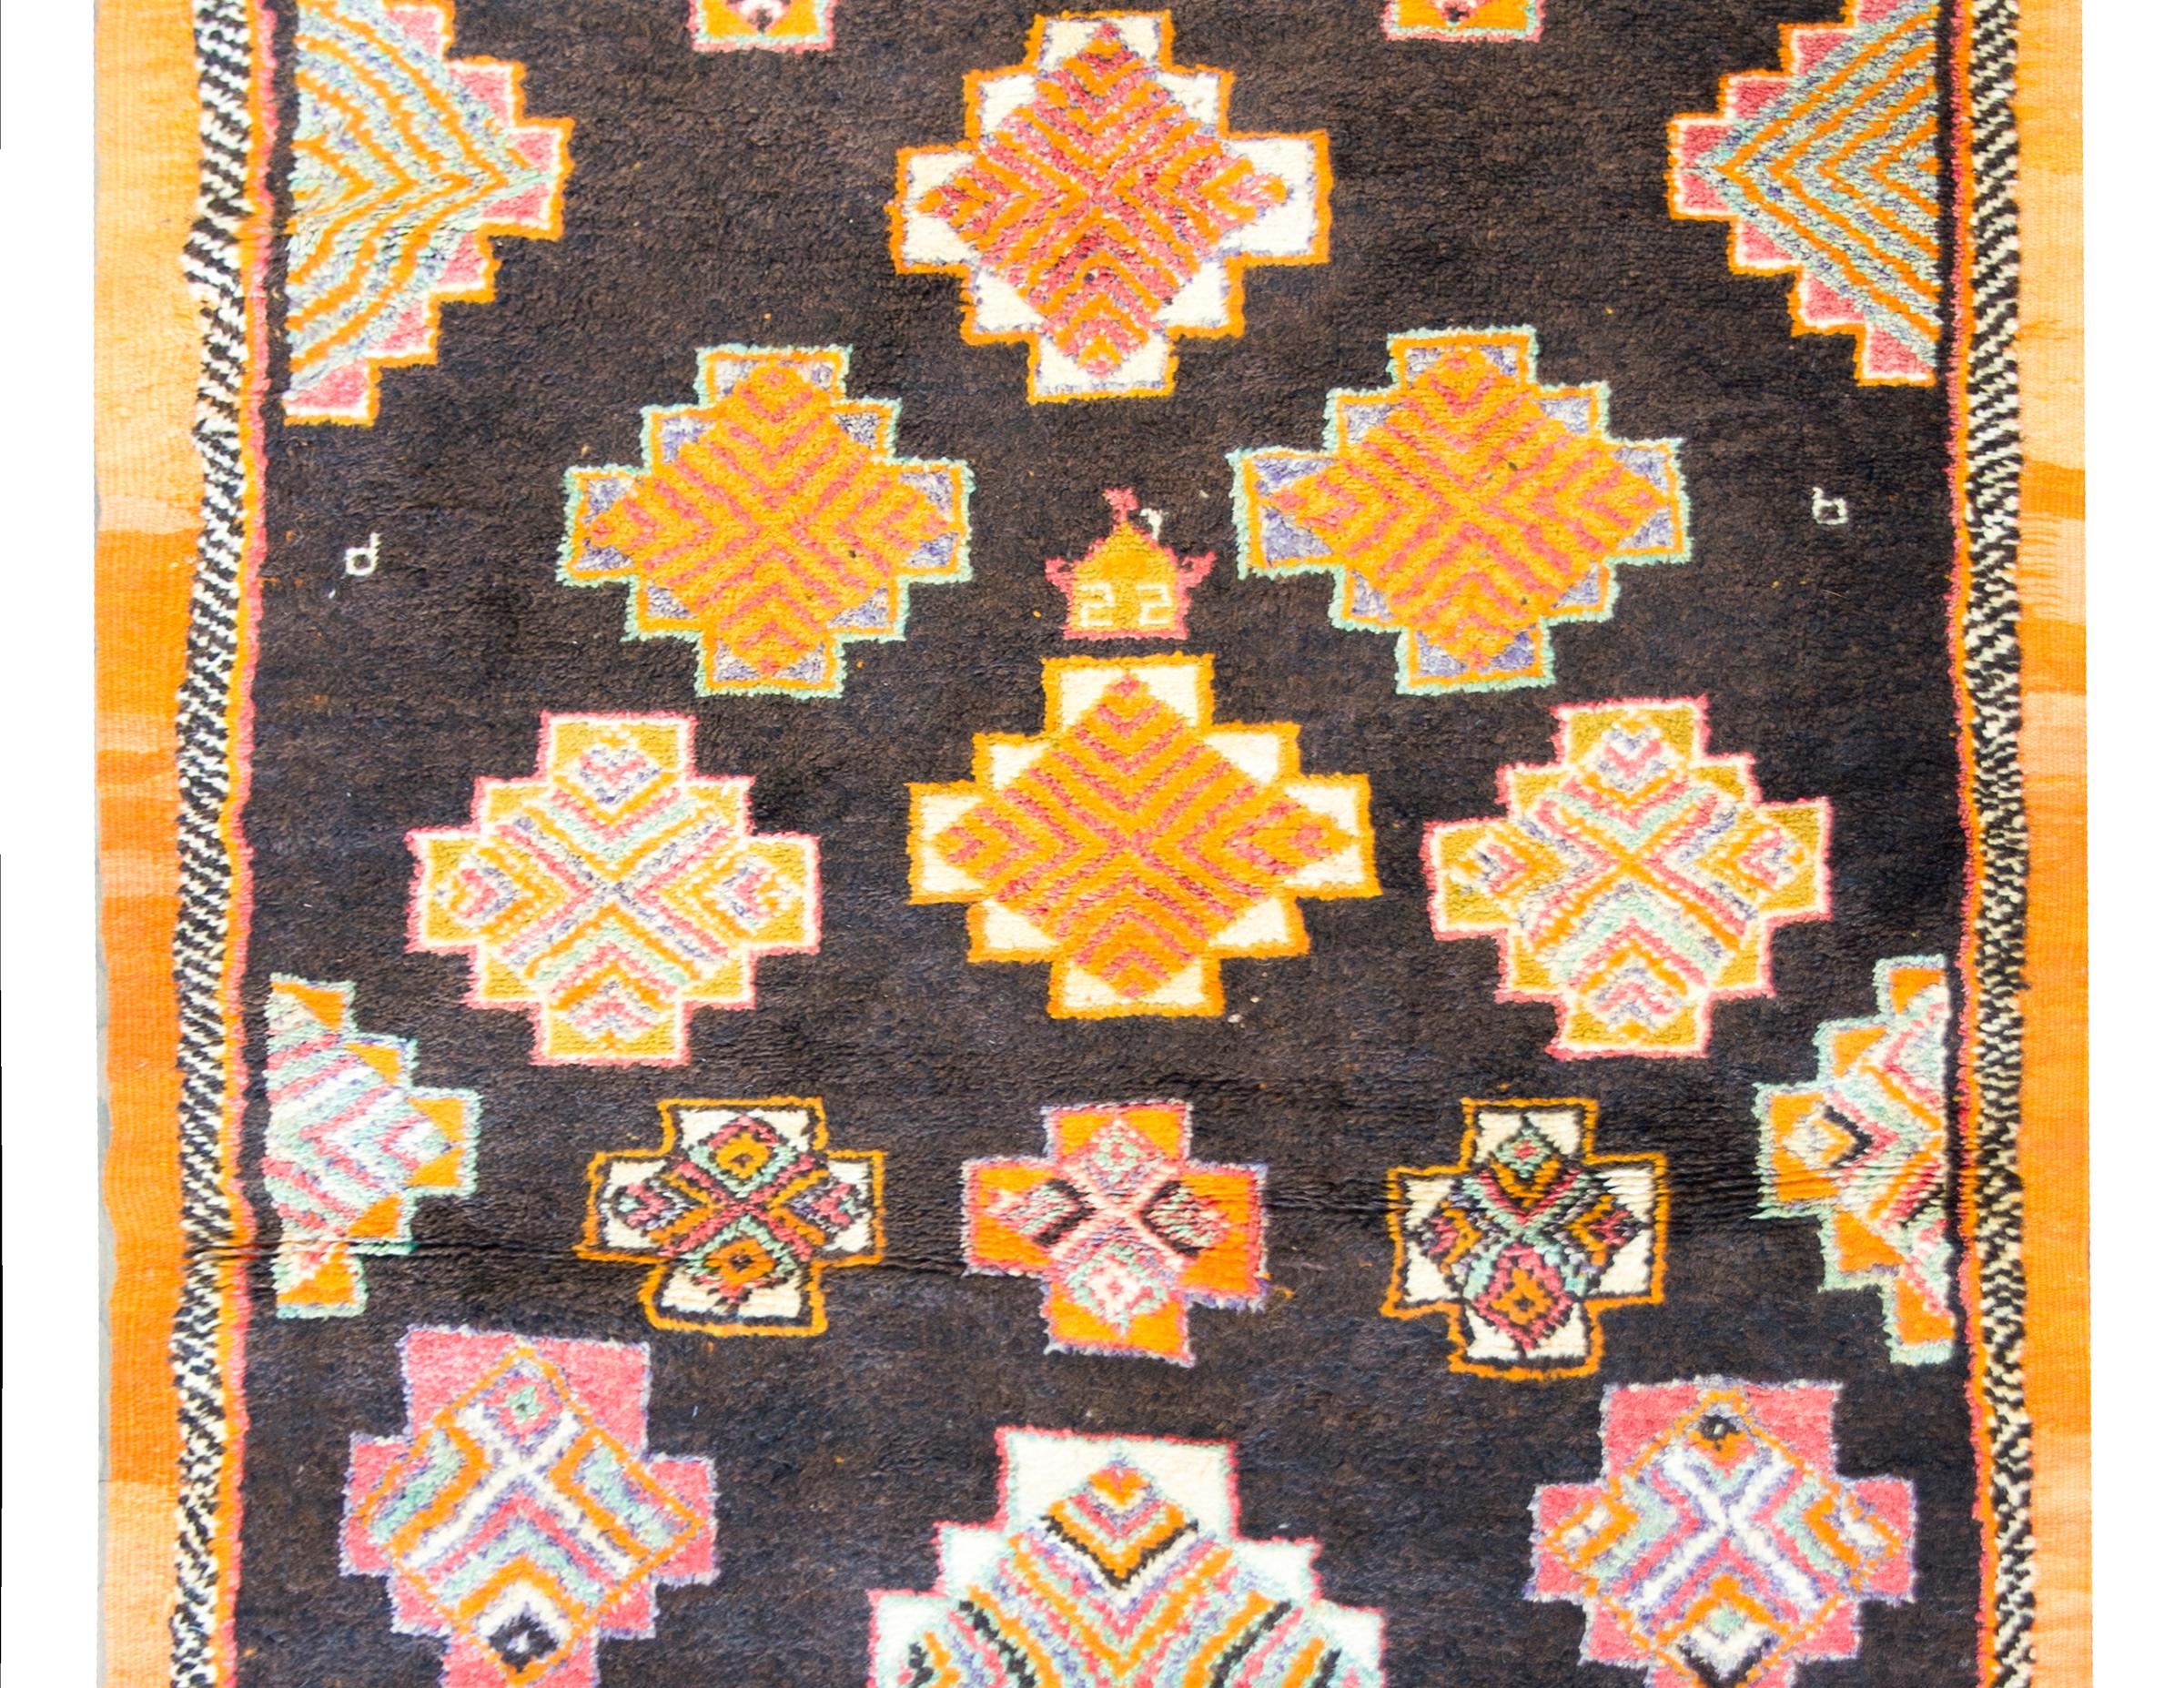 A bold and beautiful mid-20th century Moroccan rug with the best all-over diamond pattern woven in a kaleidoscope of colors including bright orange, pink, yellow, teal, and white, and all set against a black background. The border is simple with a